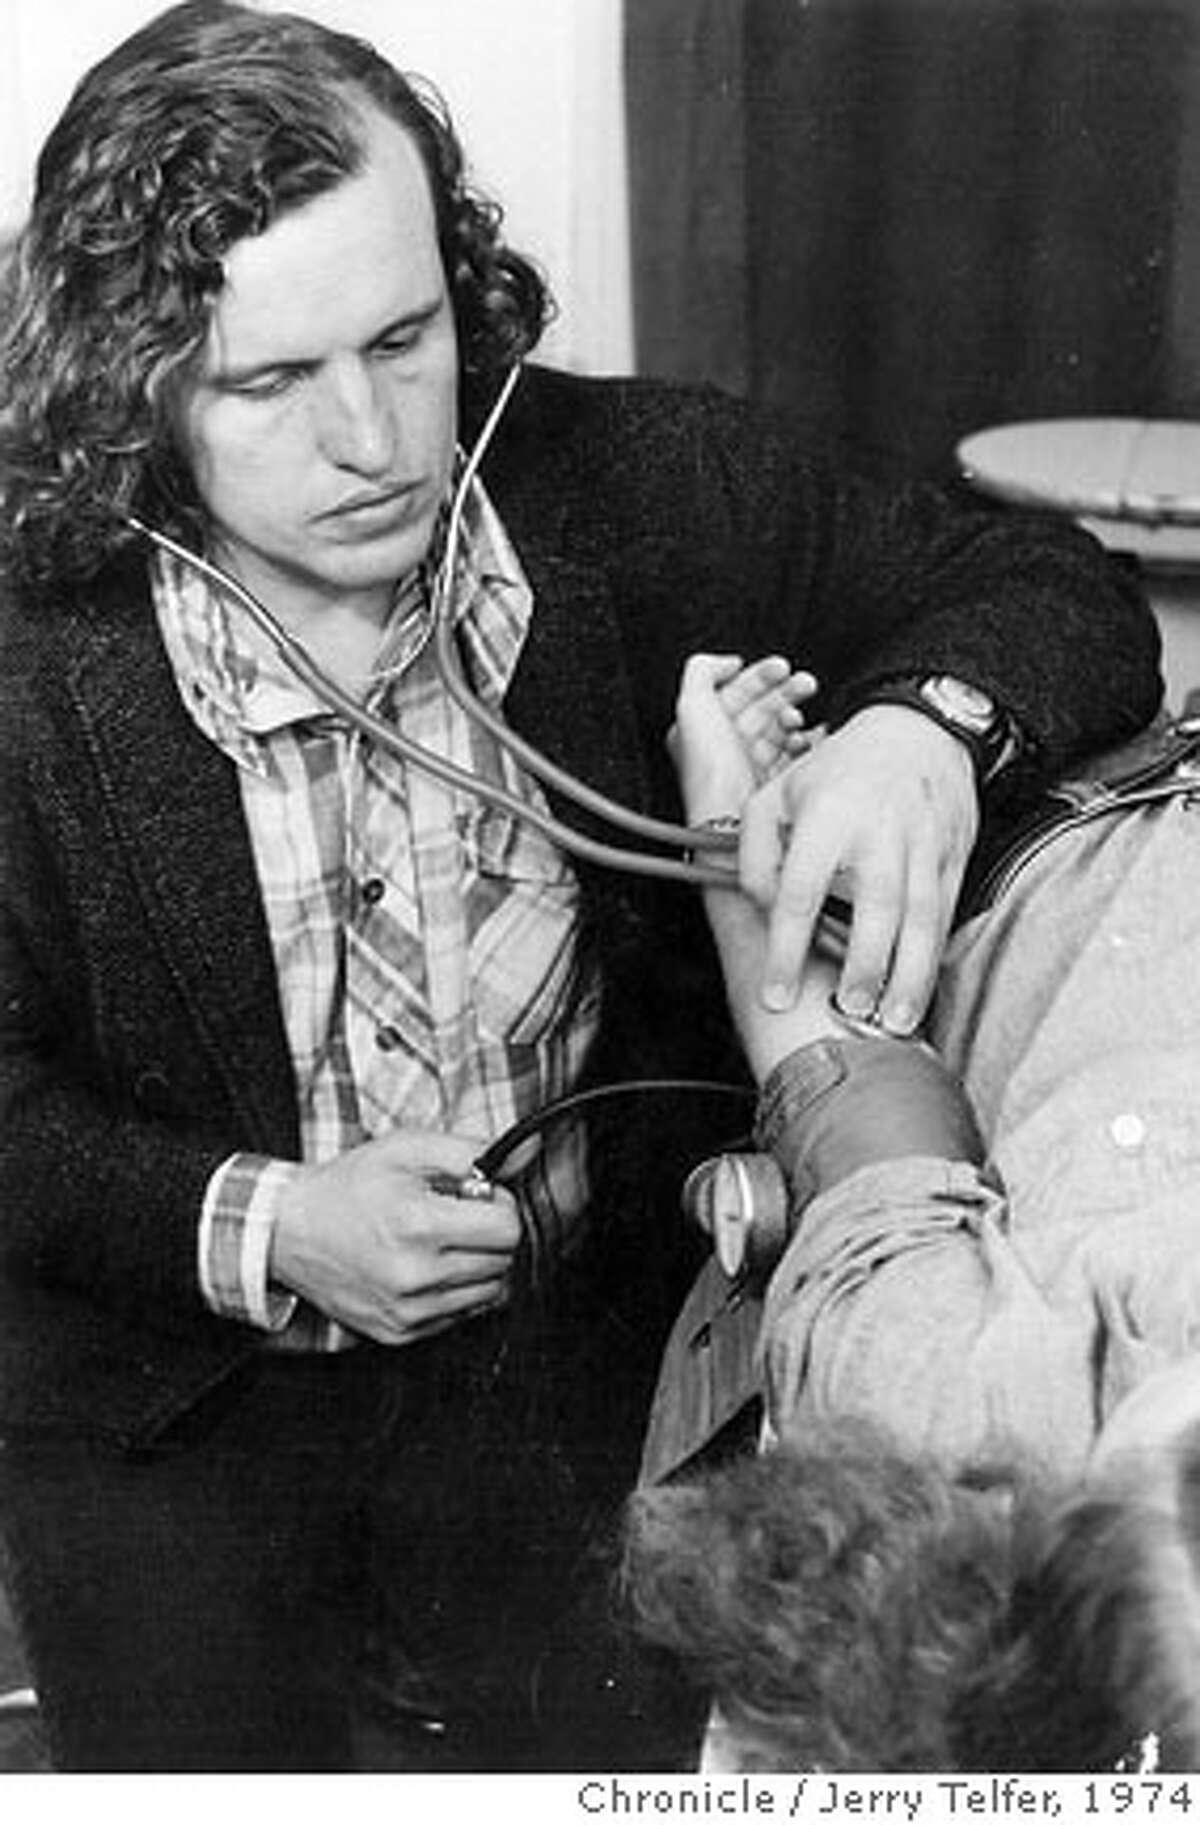 November 1, 1974 - Dr. David E. Smith takes a patient's blood pressure at the Haight-Ashbury Free Medical Clinic. Jerry Telfer/ Chronicle File Photo 1974